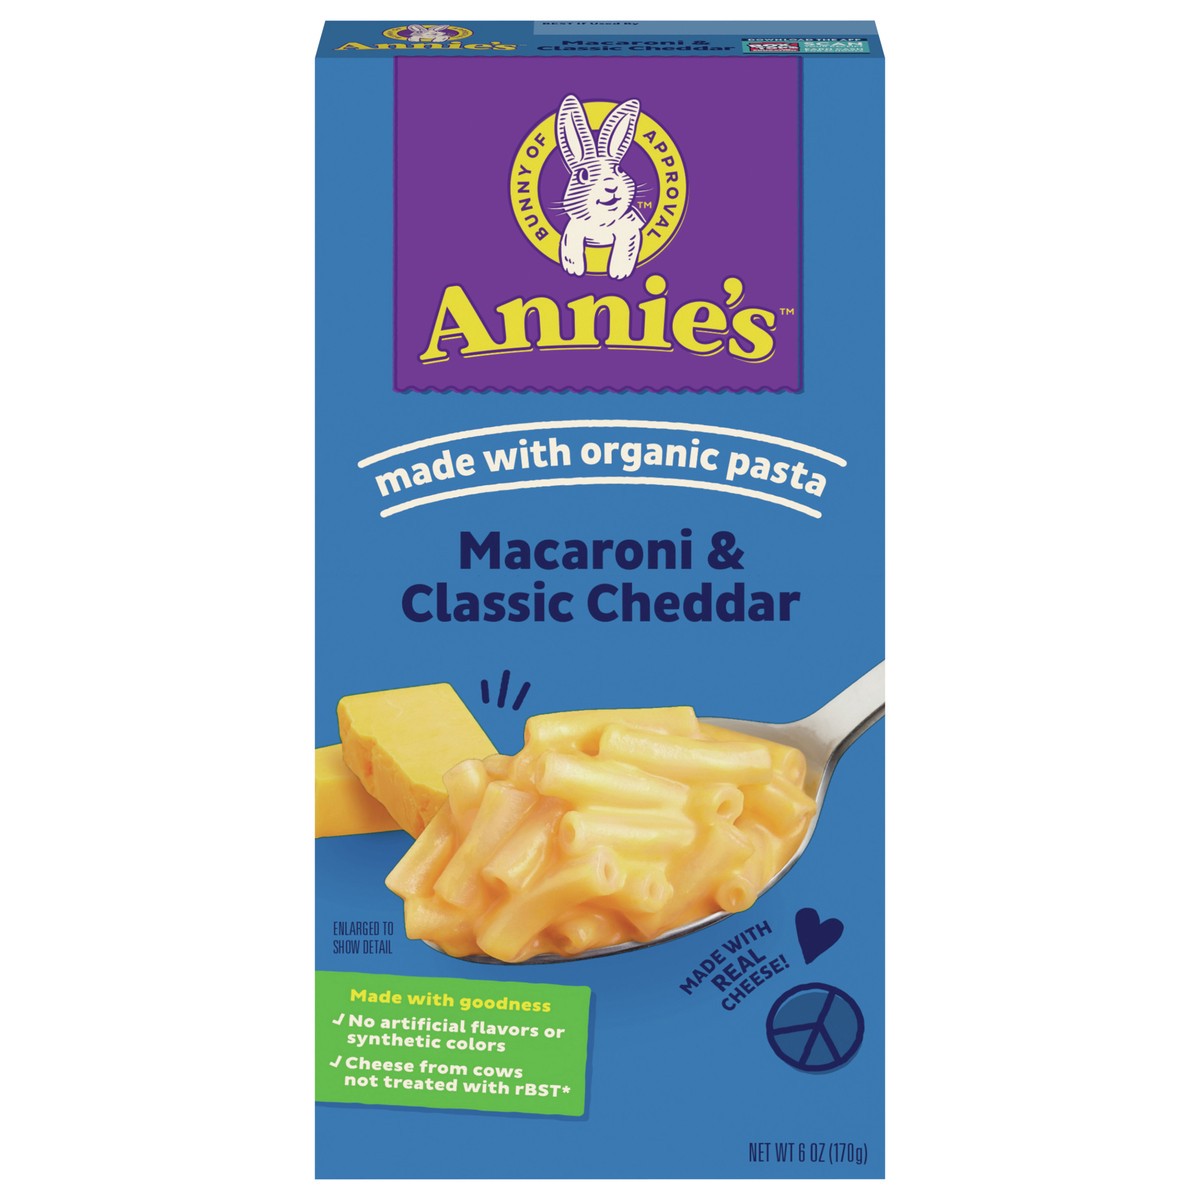 slide 1 of 108, Annie's Annie''s Classic Cheddar Macaroni and Cheese Dinner with Organic Pasta, 6 OZ, 6 oz